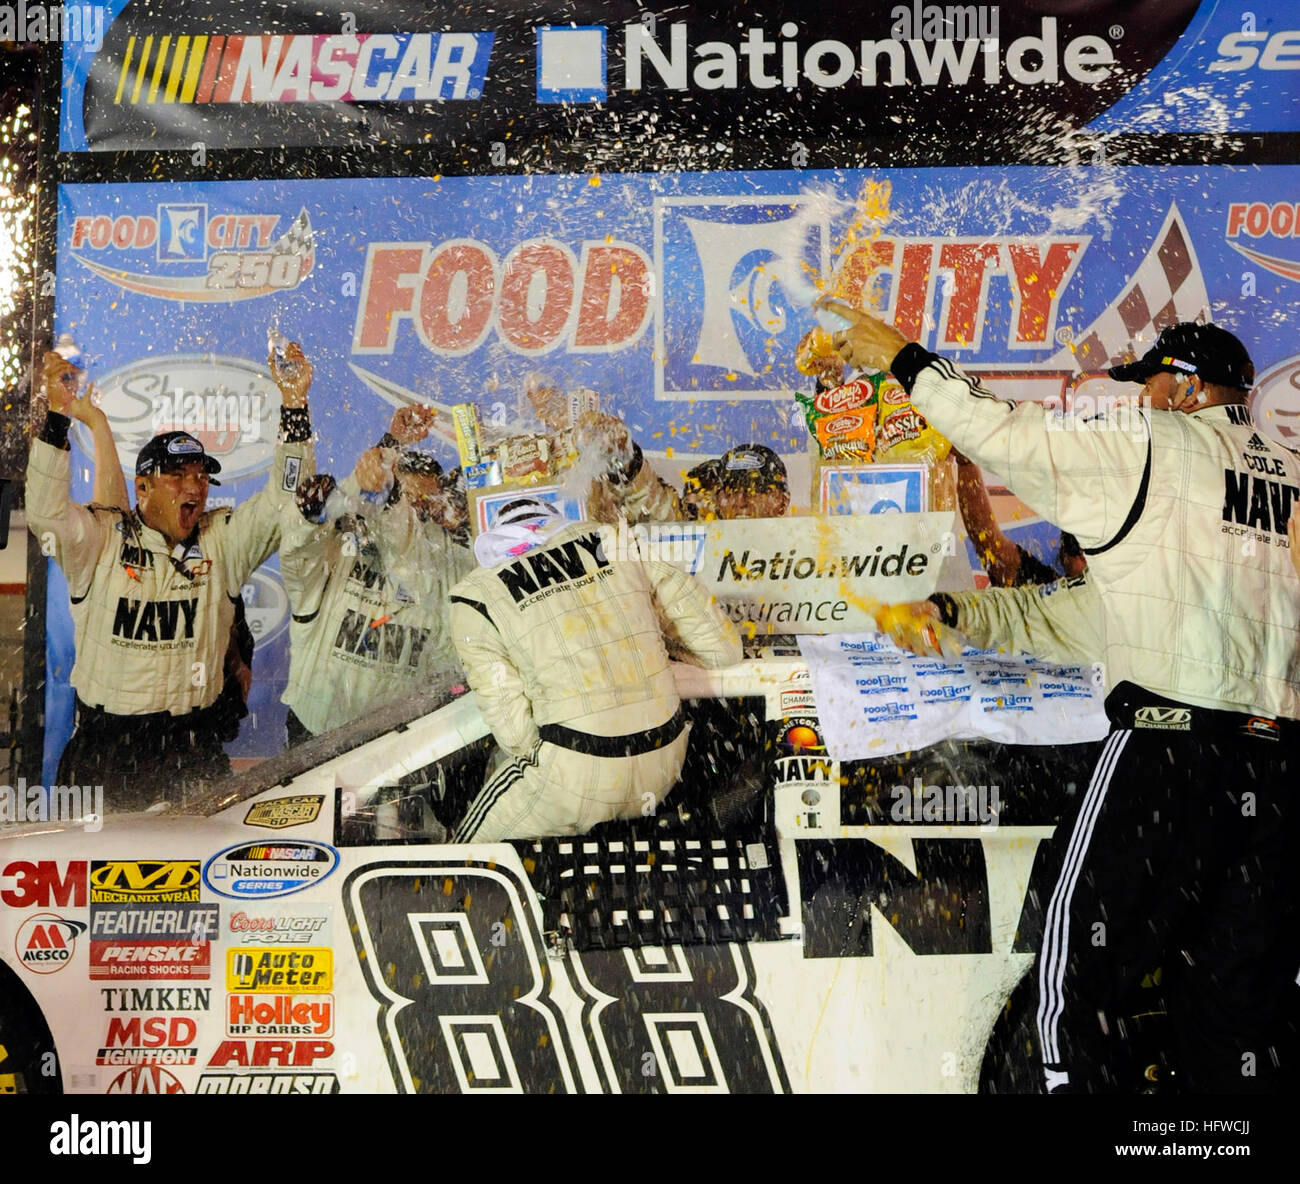 080822-N-5345W-184 BRISTOL, Tenn. (Aug. 22, 2008) JR Motorsports team members shower driver Brad Keselowski with Gatorade and water in victory lane after winning the NASCAR Nationwide Series Food City 250 at Bristol Motor Speedway in Bristol. Keselowski overcame a 37th place starting position to claim his second career victory and won second place overall in the nationwide championship standings. (U.S. Navy photo by Mass Communication Specialist 2nd Class Kristopher S. Wilson/Released) US Navy 080822-N-5345W-184 JR Motorsports team members shower driver Brad Keselowski with Gatorade and water  Stock Photo